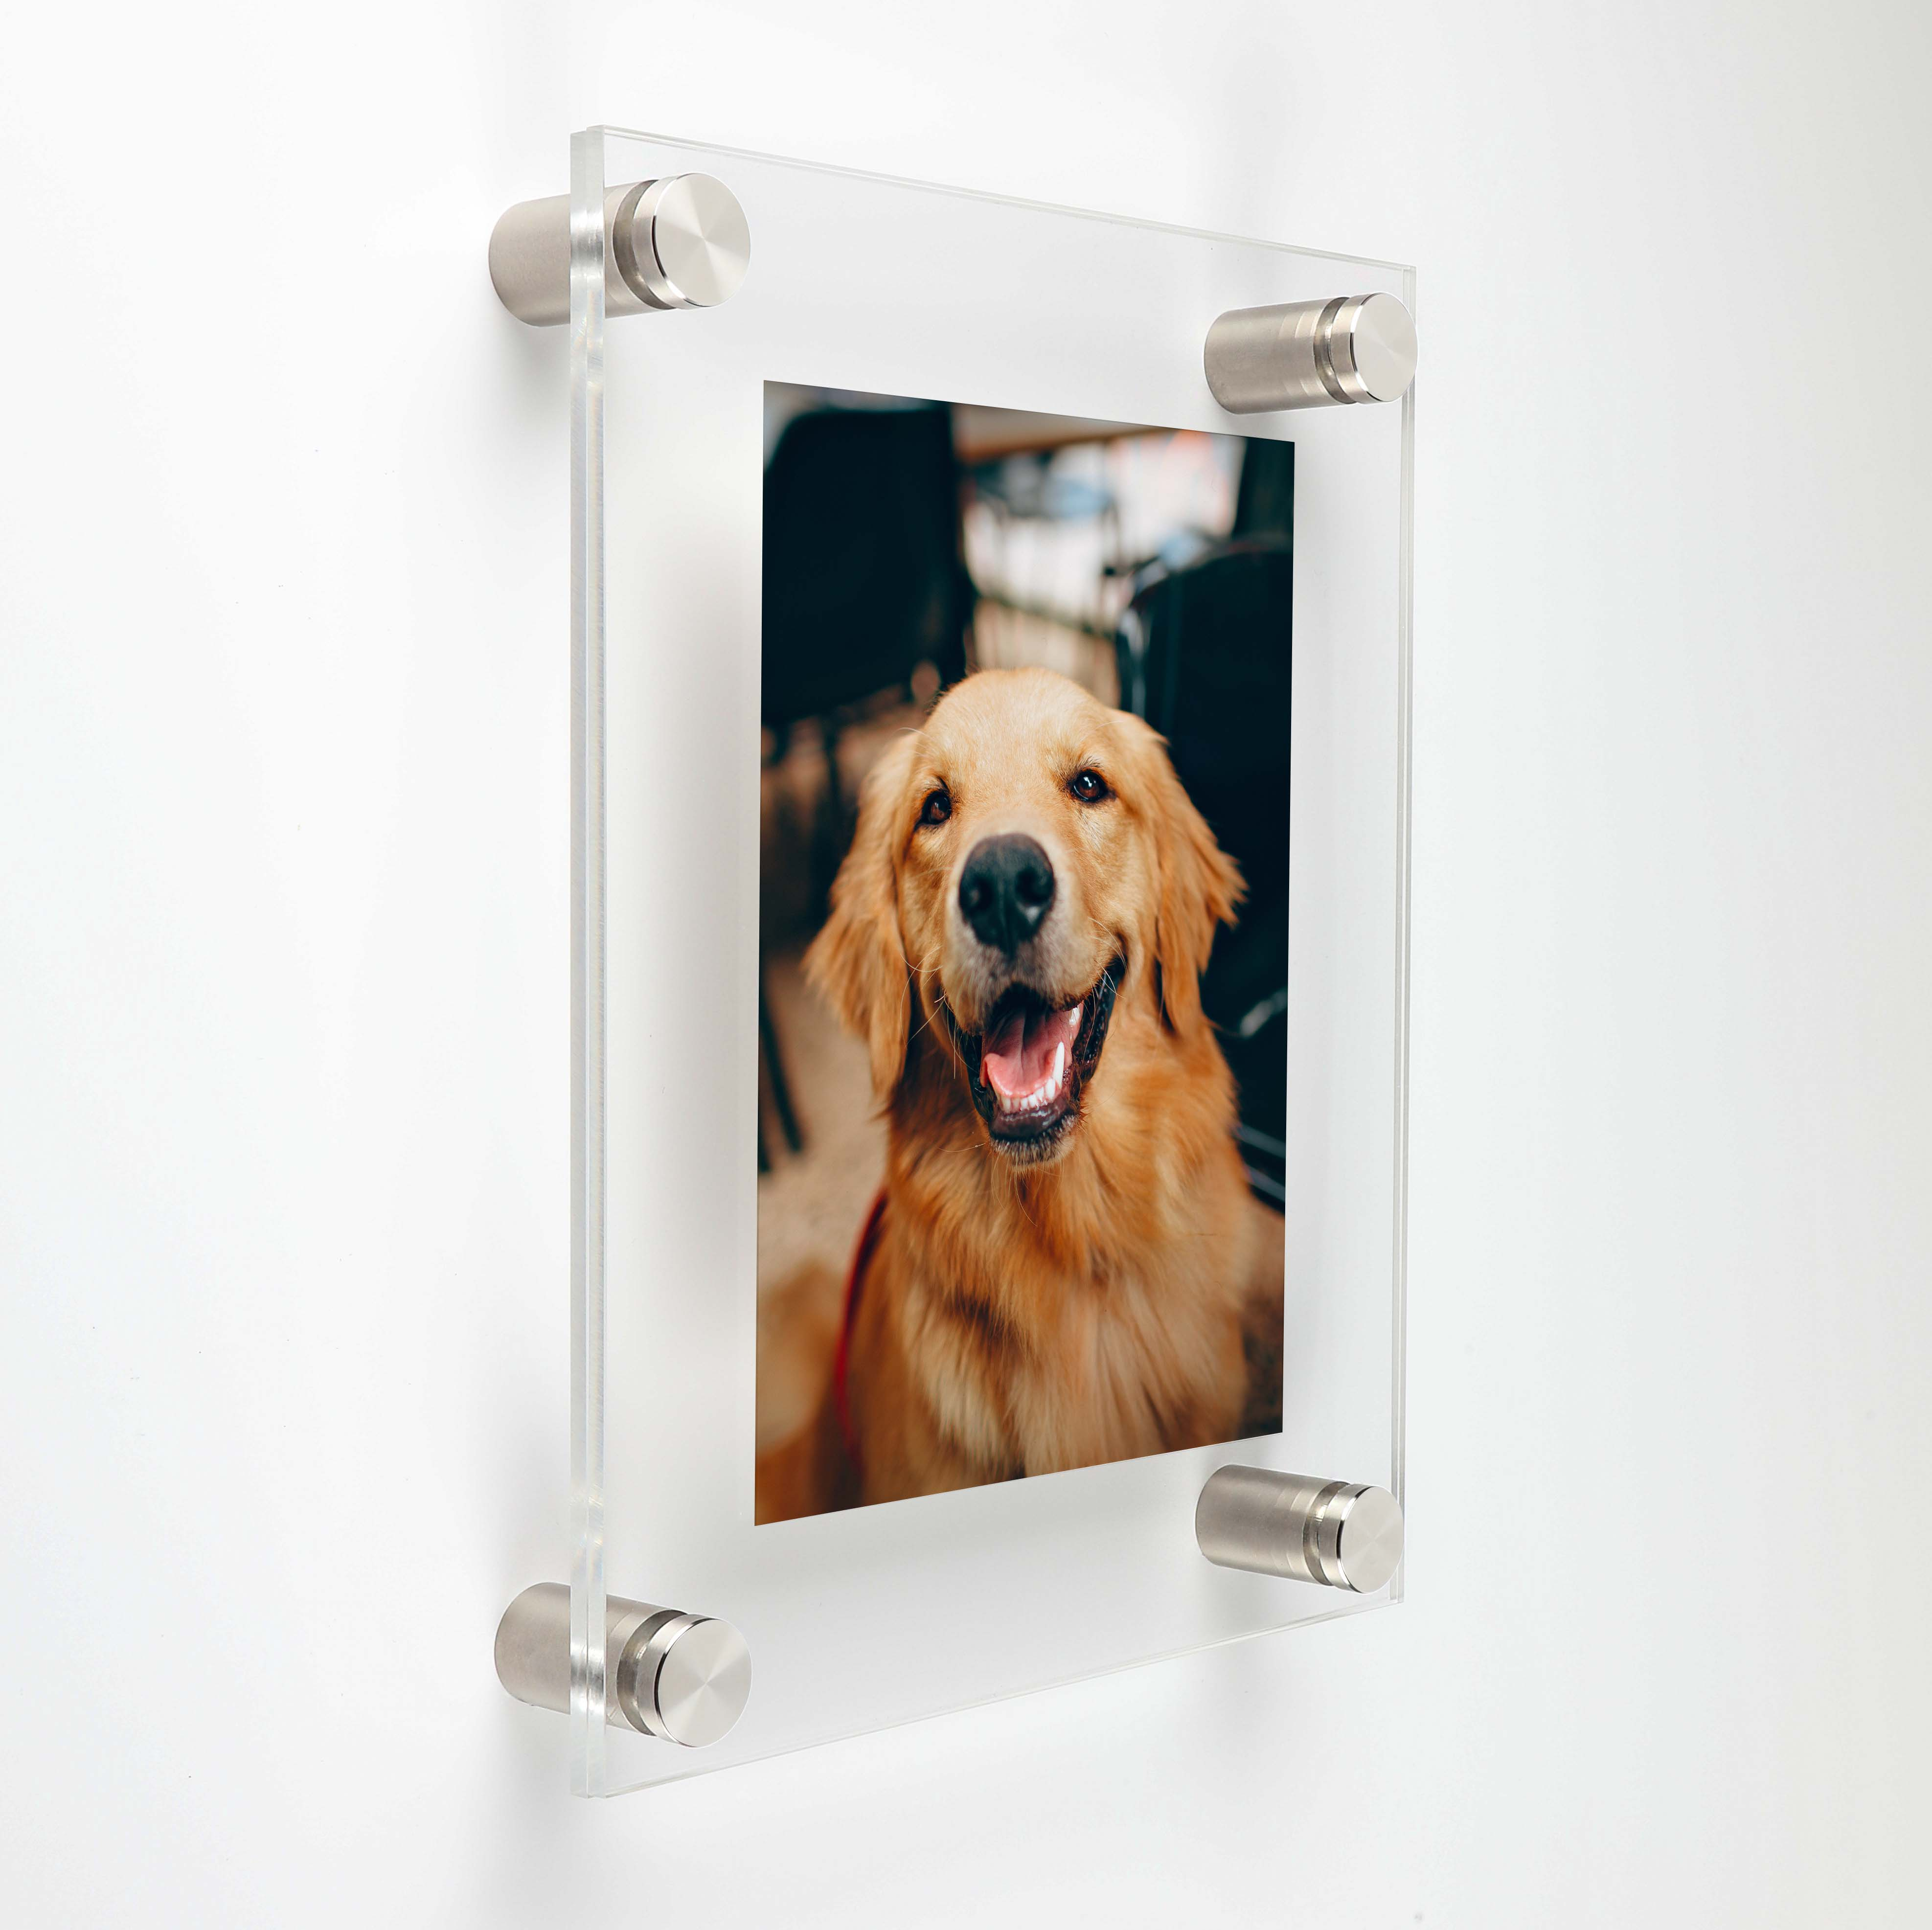 (2) 7-1/2'' x 9-1/2'' Clear Acrylics , Pre-Drilled With Polished Edges (Thick 1/8'' each), Wall Frame with (4) 5/8'' x 3/4'' Brushed Stainless Steel Standoffs includes Screws and Anchors